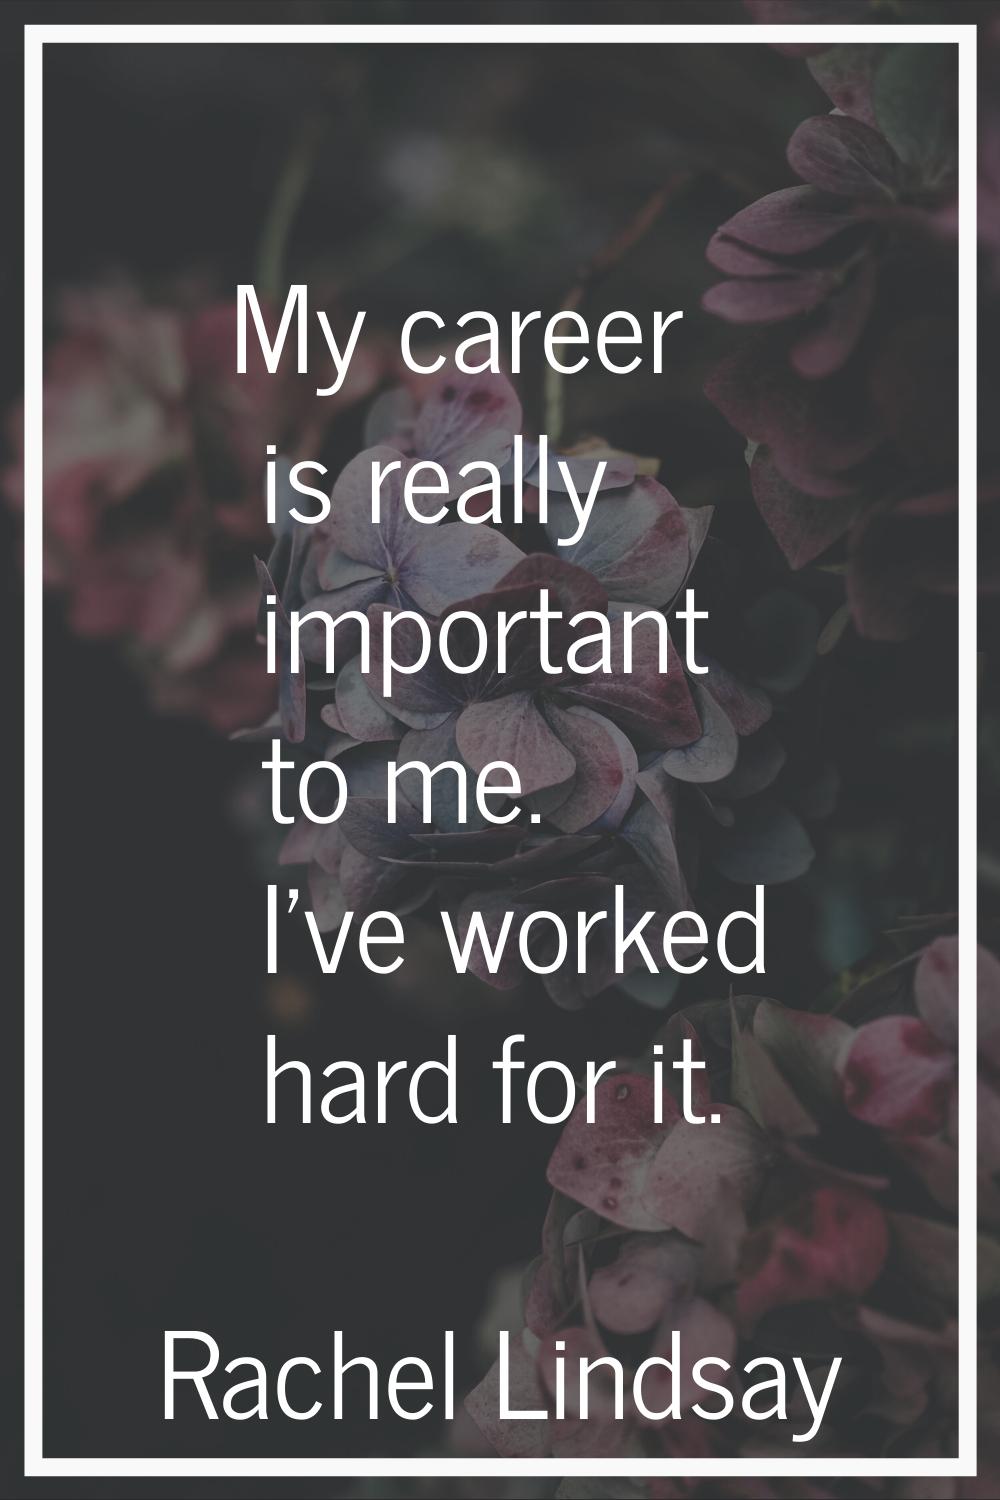 My career is really important to me. I've worked hard for it.